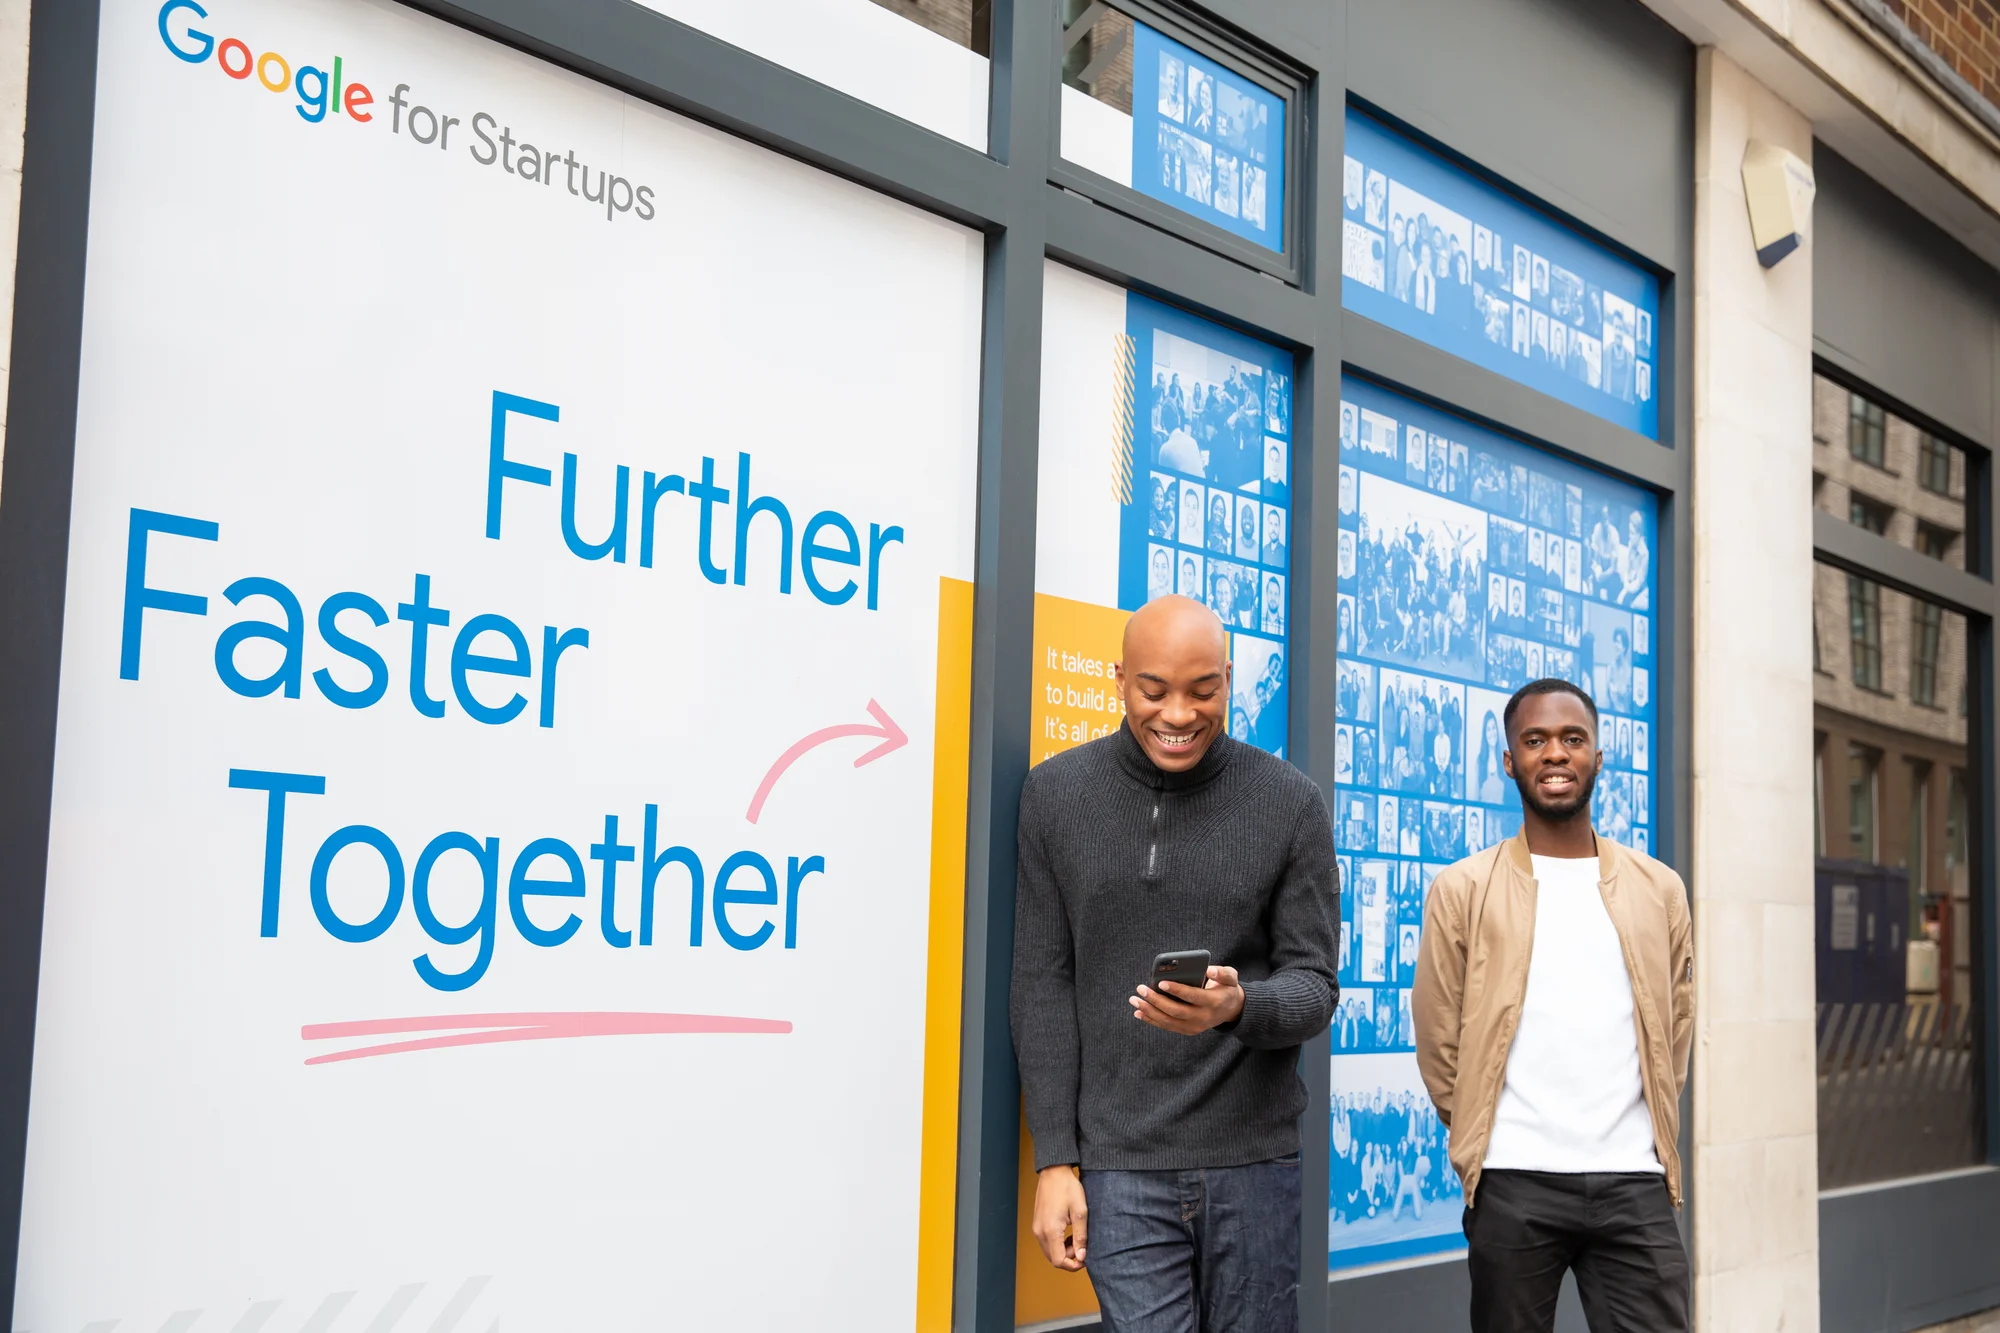 Two men stand against a wall that says "Google for Startups, Further, Faster, Together." One of them looks at his smartphone, smiling, while the other looks into the camera, smiling.